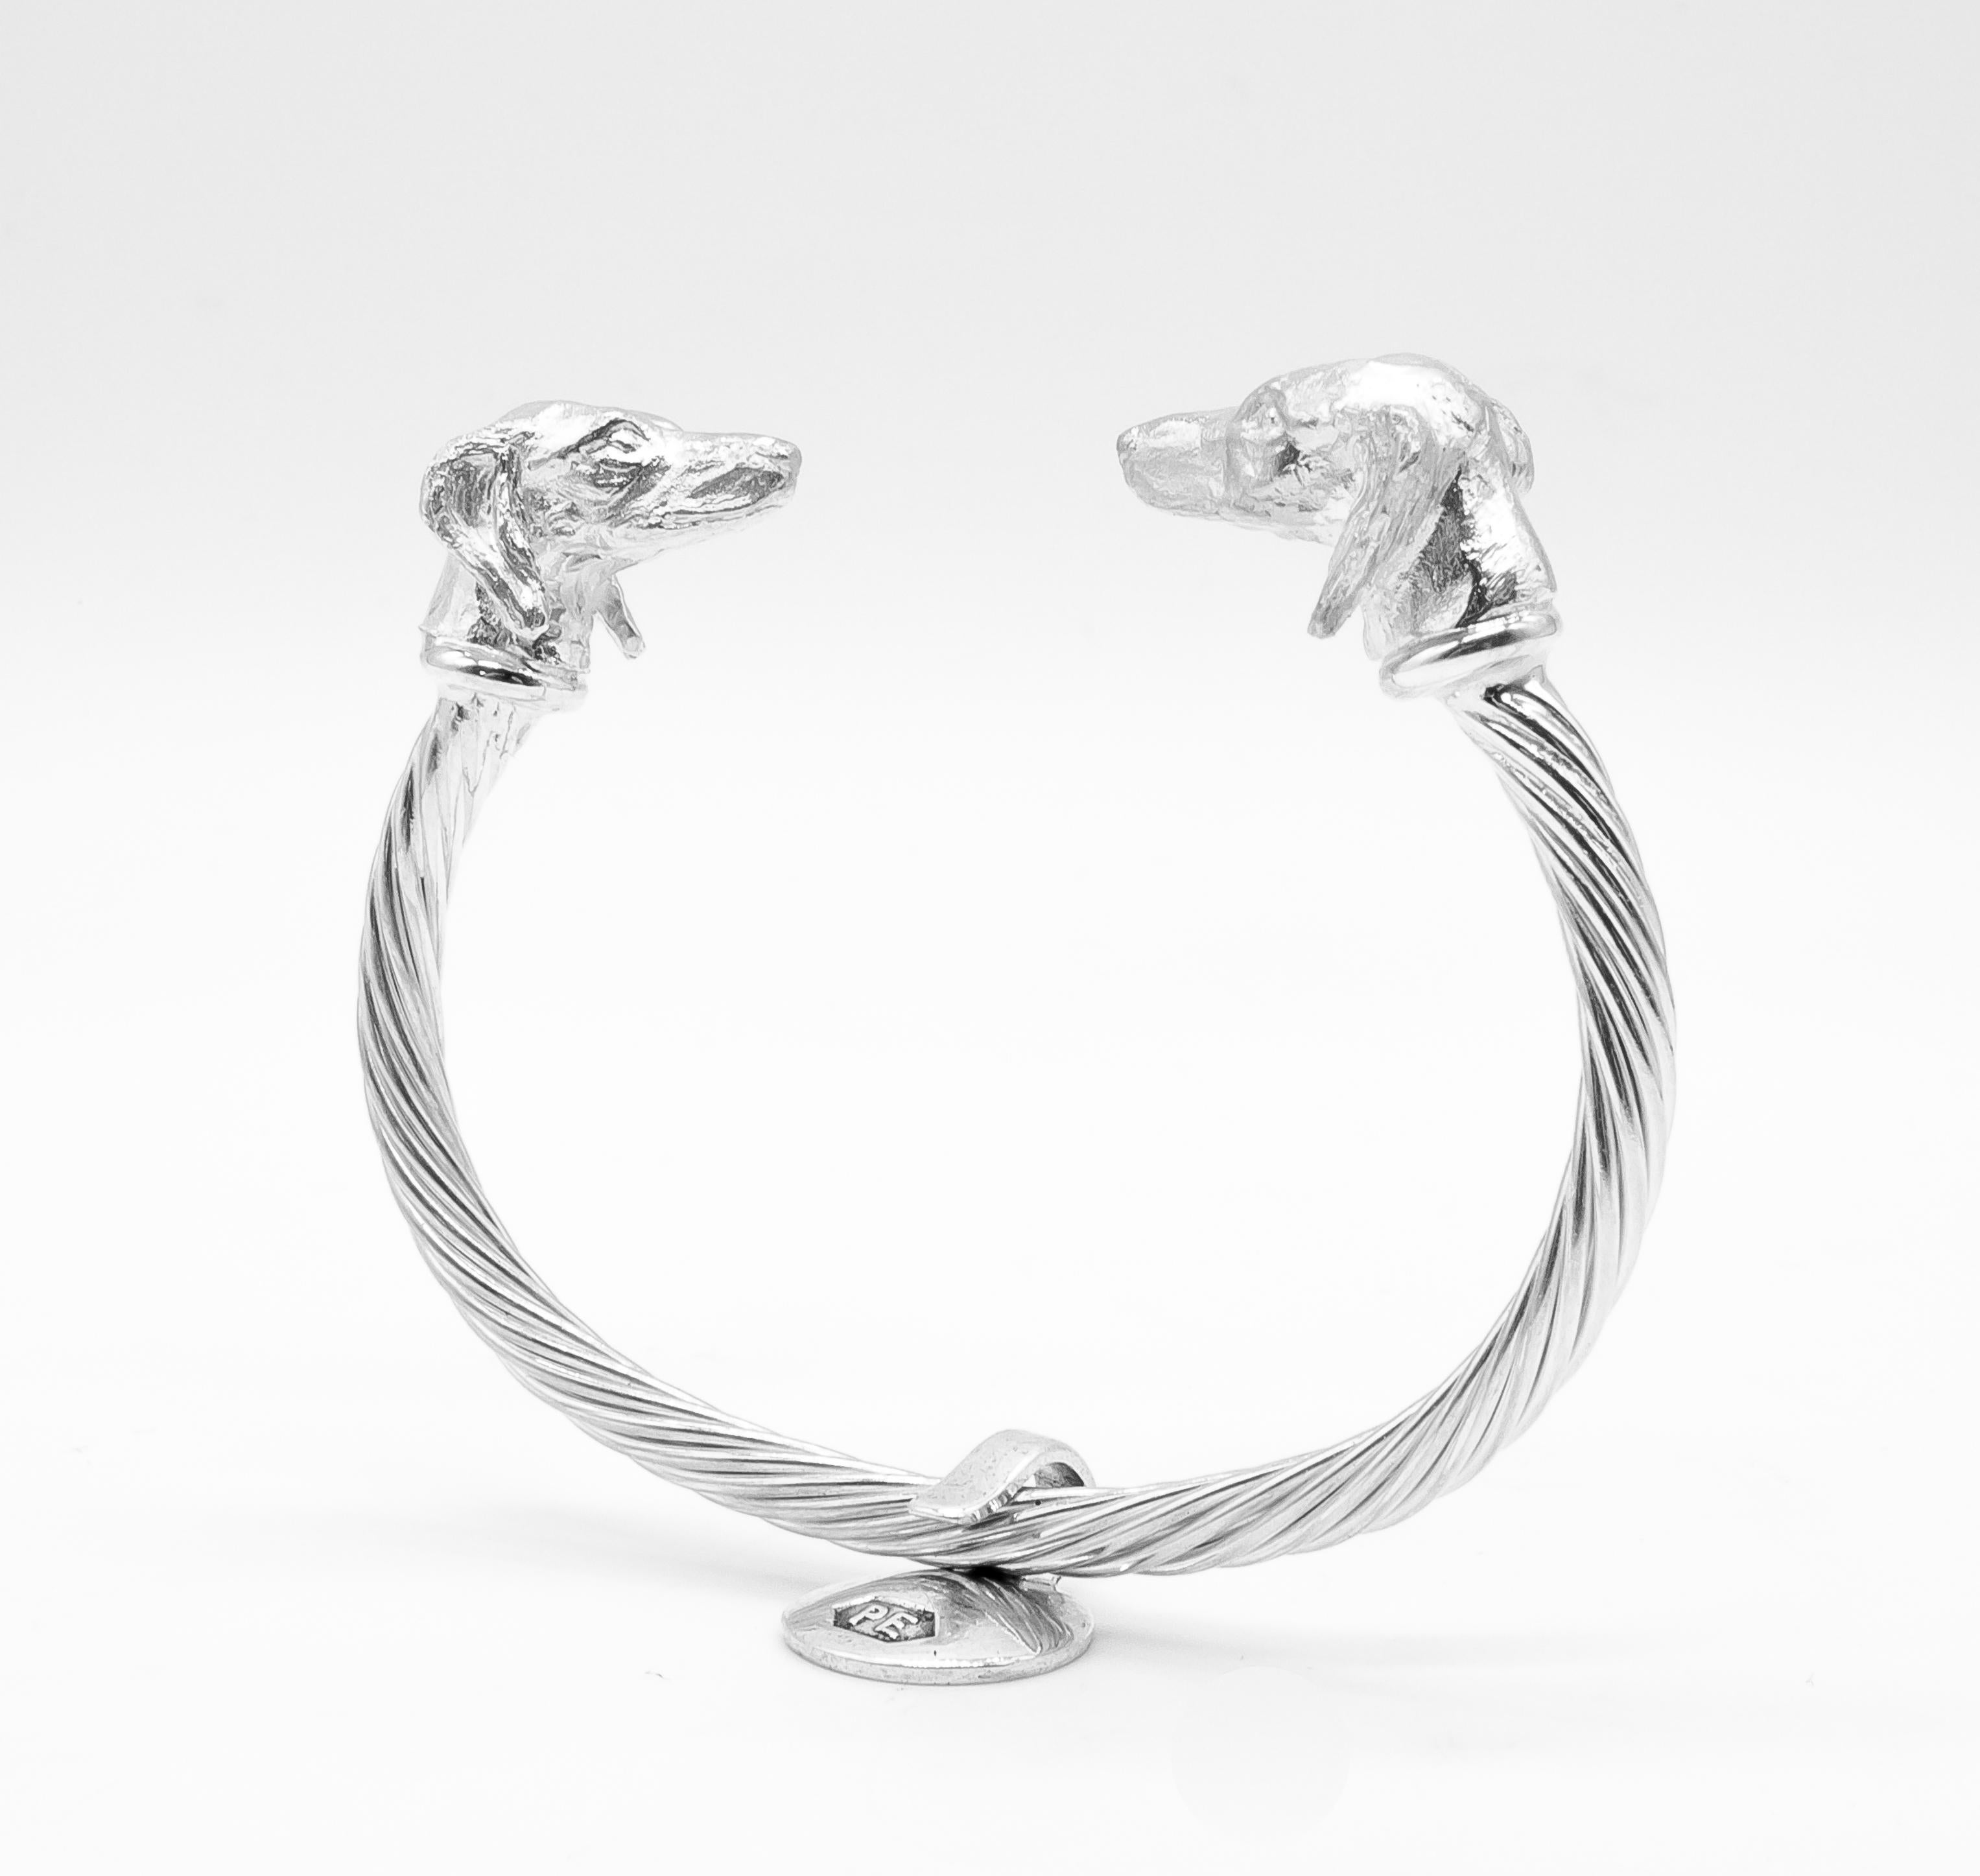 Intricately hand carved dog miniatures of Saluki Heads (details in photos) on a sterling silver twisted bangle are made by England’s Paul Eaton who is possibly the world's best miniature sculptor of dogs and animals and a master gold/silversmith. 